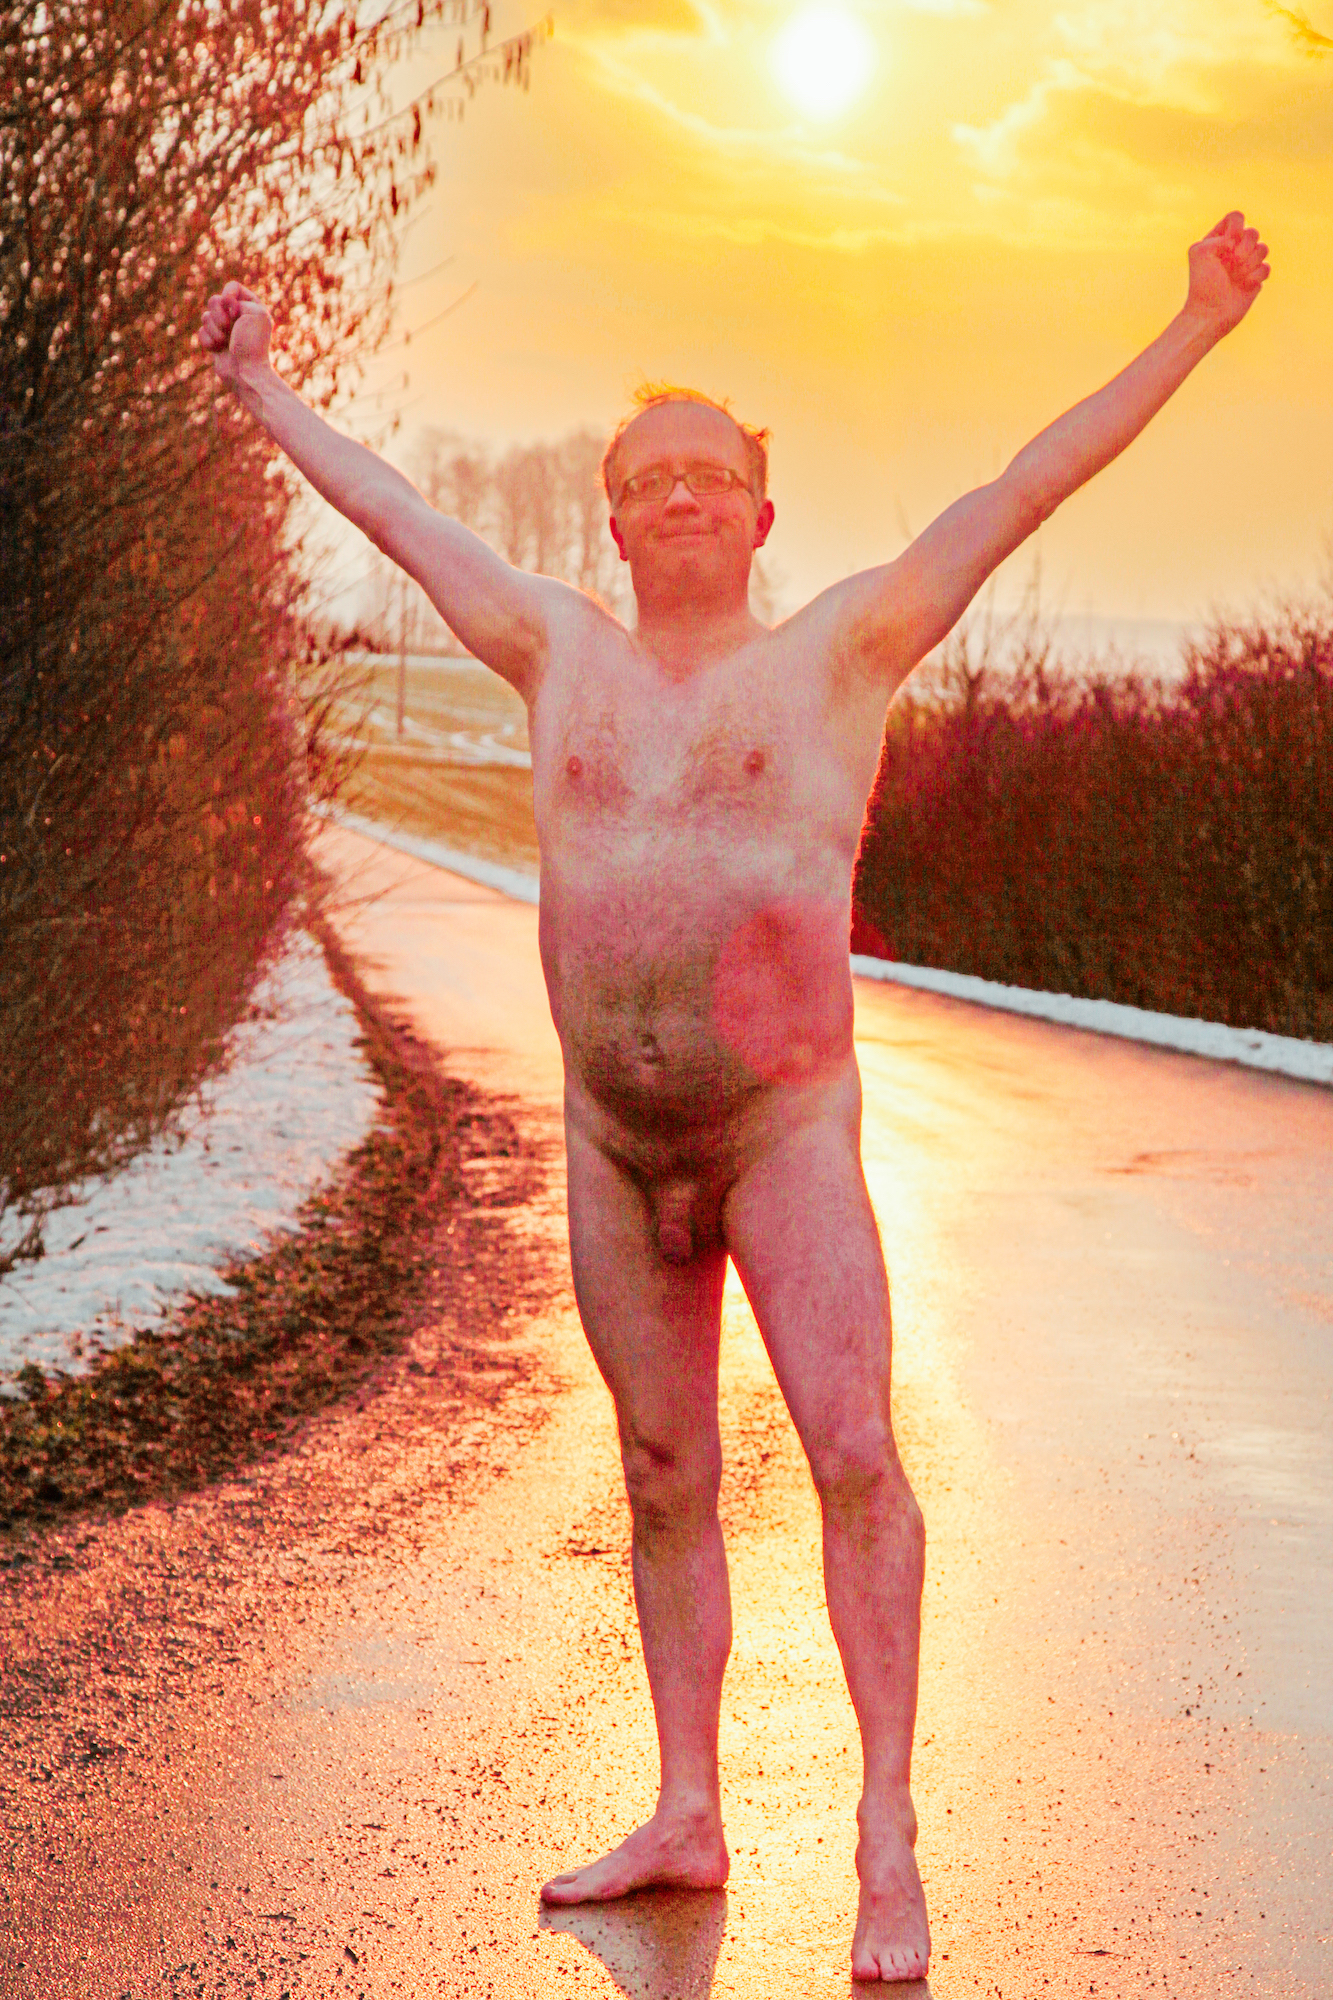 Male nude on an icy road in Mettenberg close to Biberach, Germany